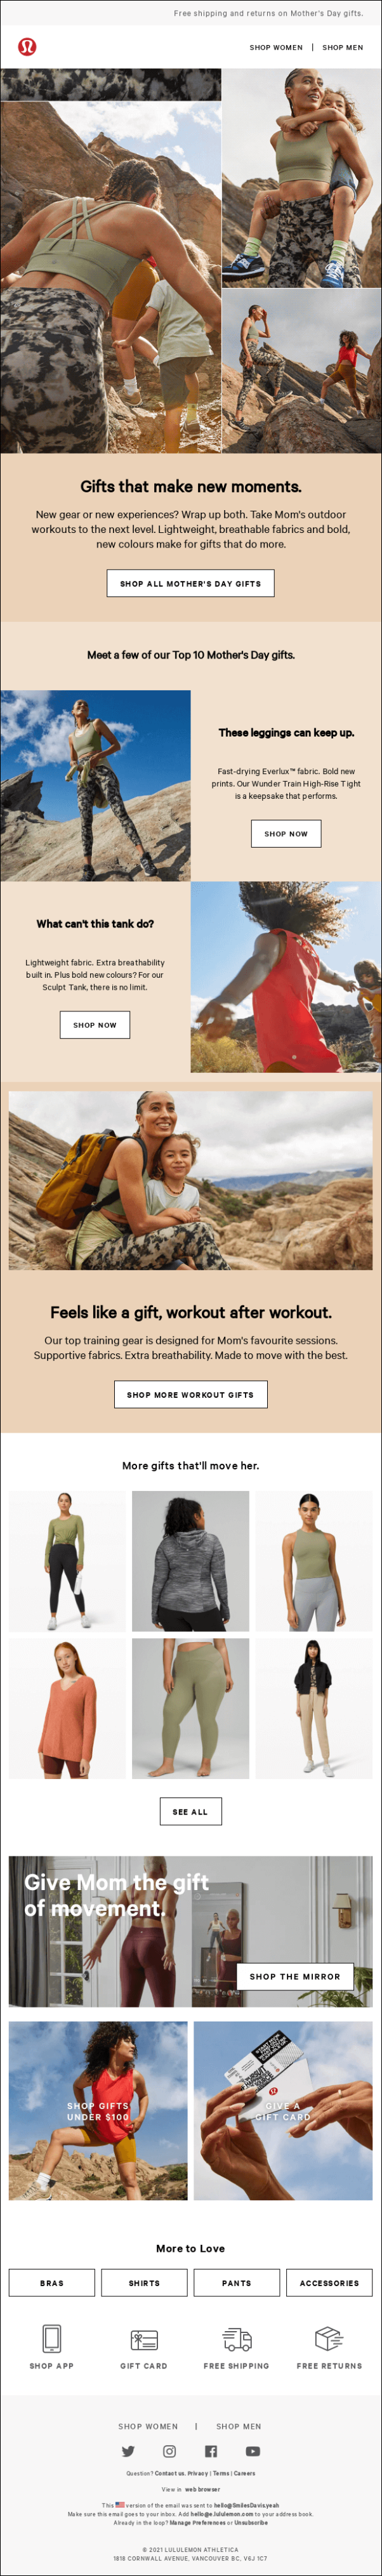 Lululemon mother's day email templates